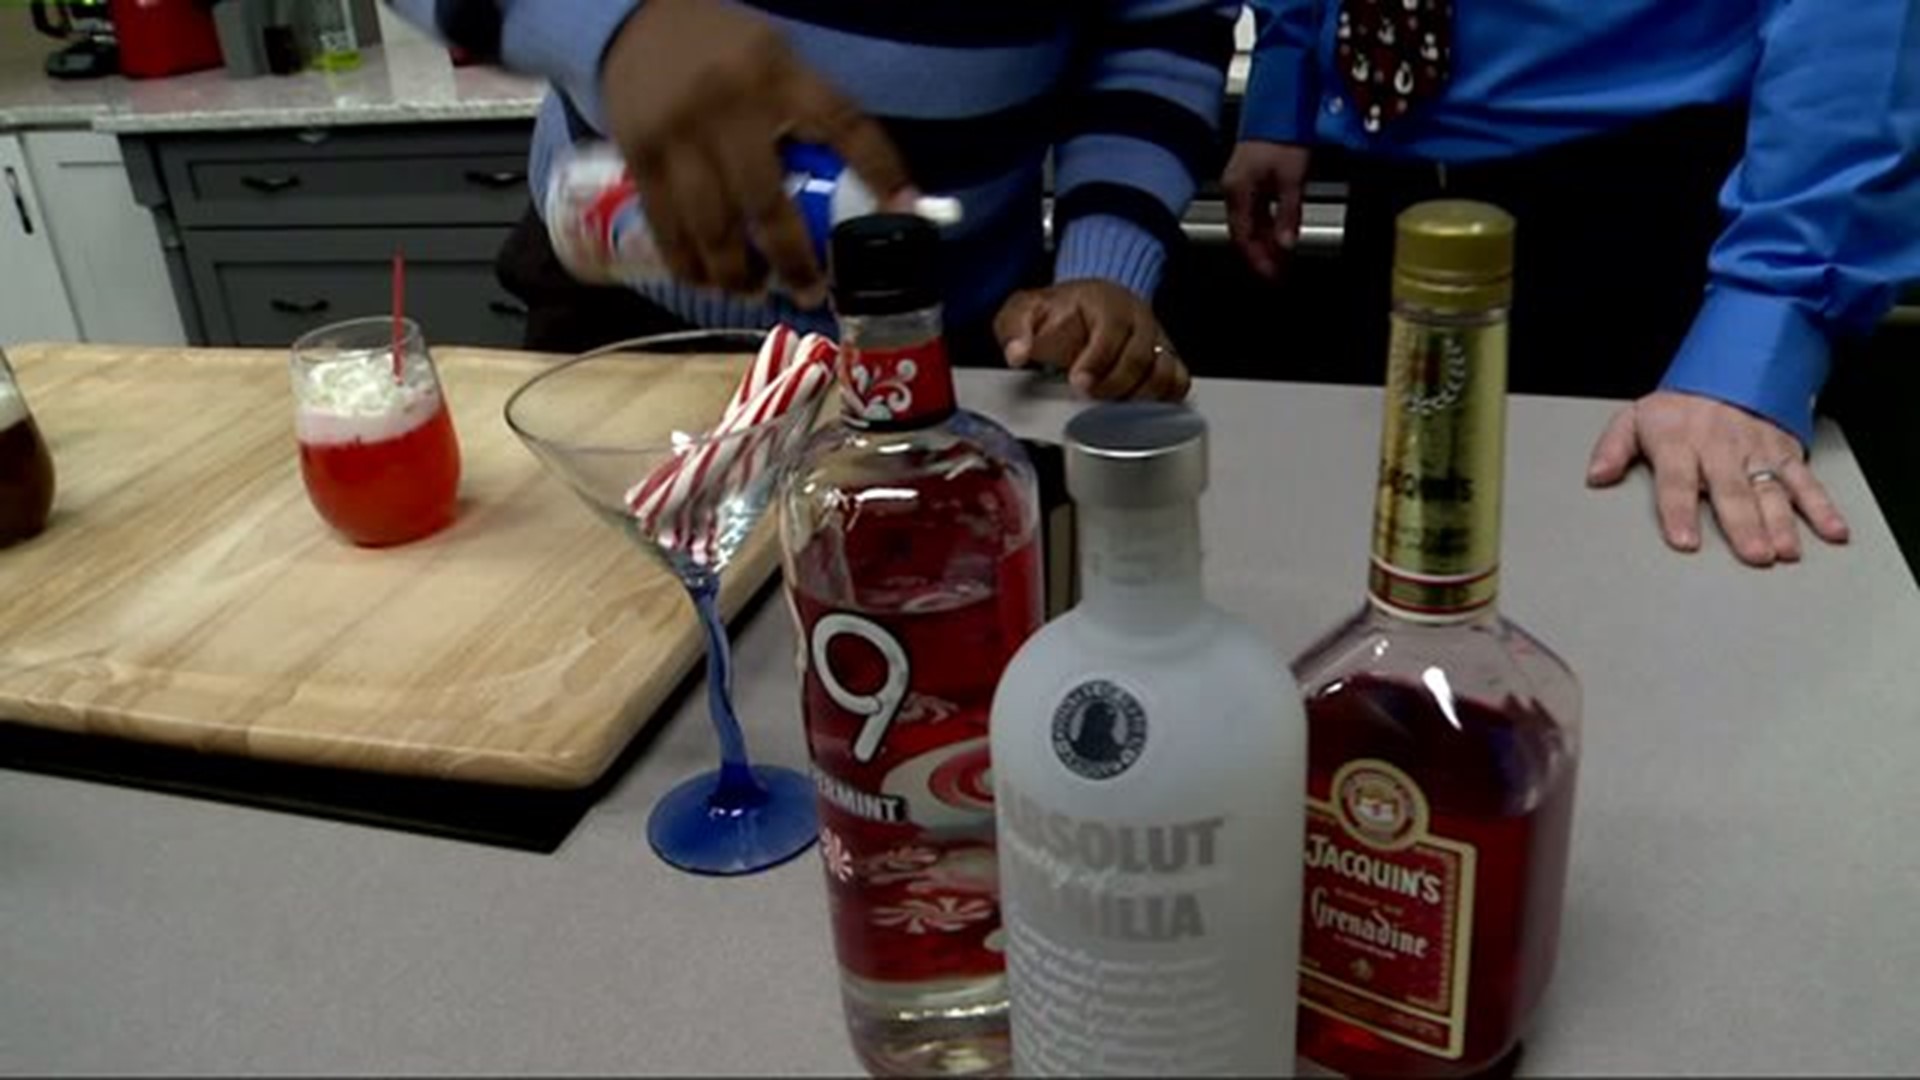 Warm up with some "snow storm cocktails" this weekend